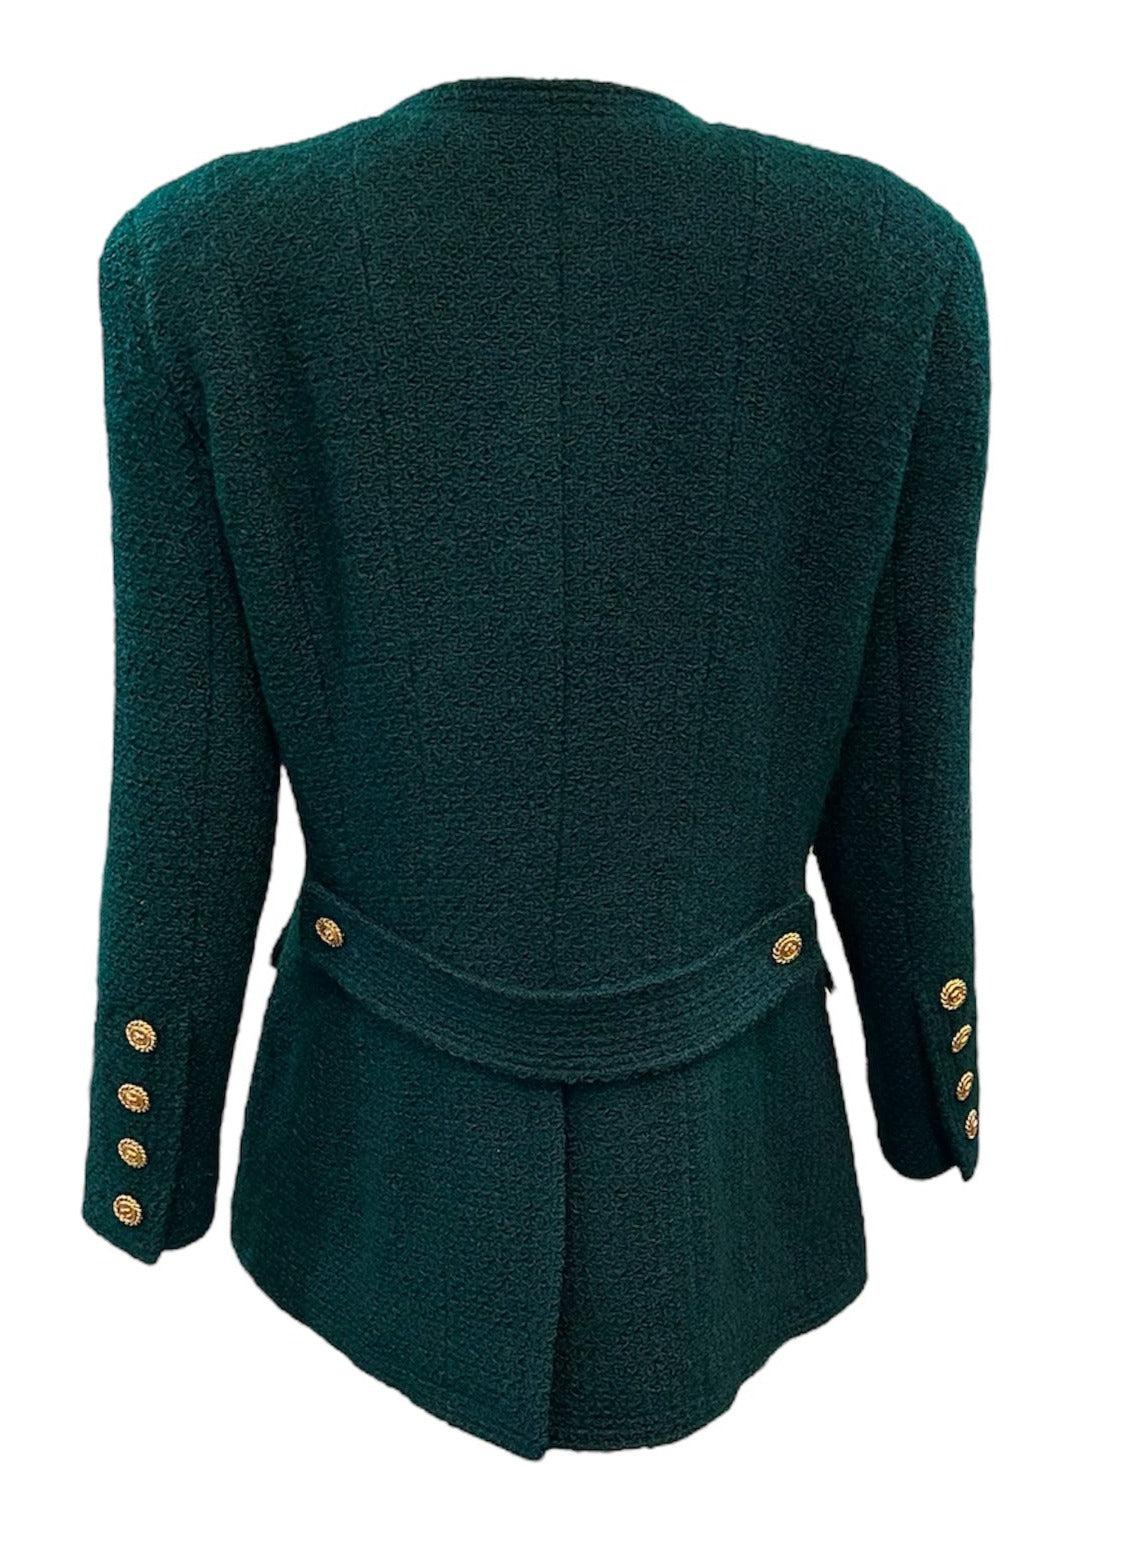   Chanel 90s Kelly Green  Double Breasted Nubby Wool Jacket with Logo Buttons BACK 3 of 6